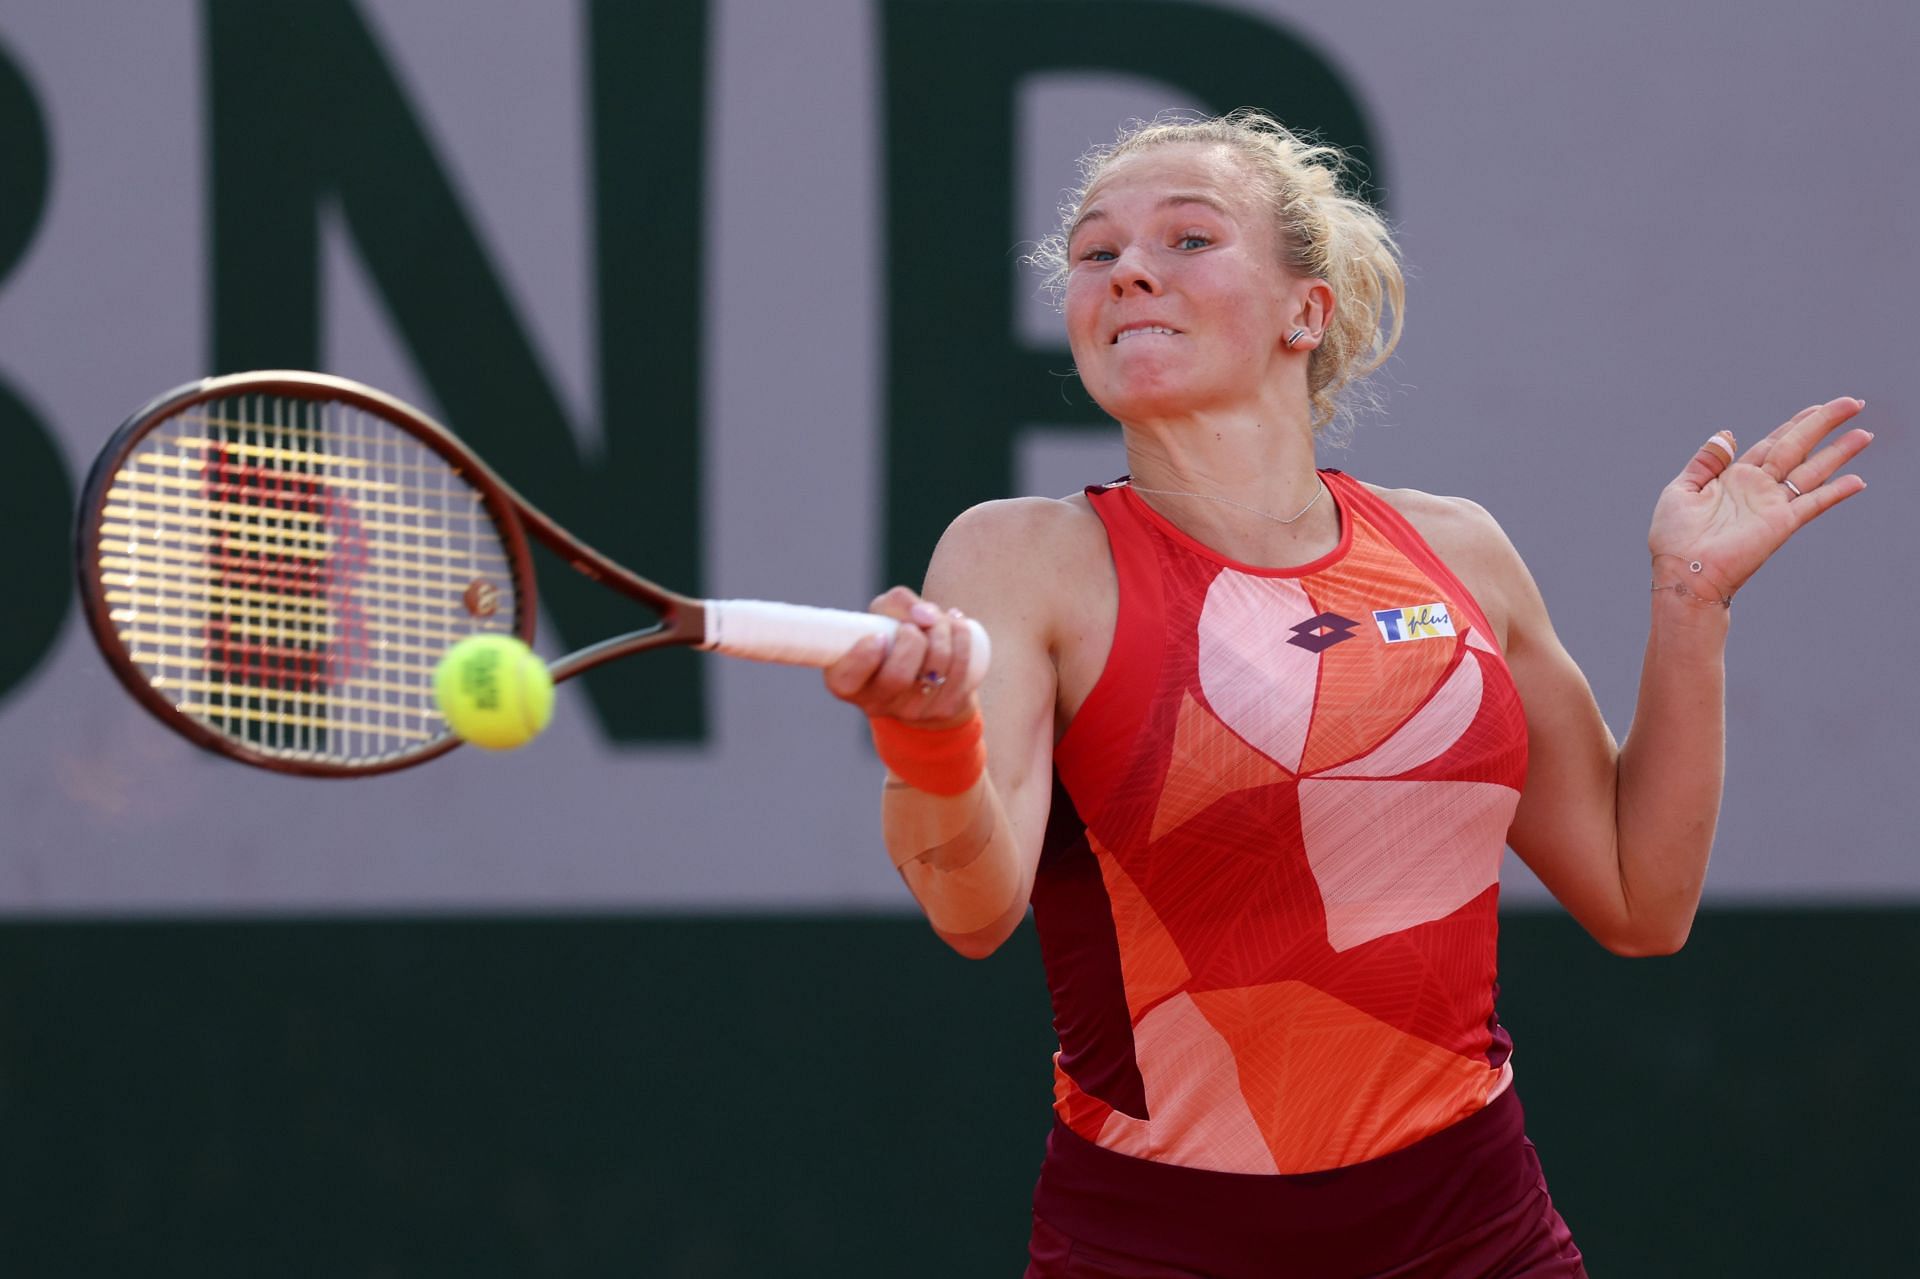 Katerina Siniakova could reach her third final of the year at the Jiangxi Open.